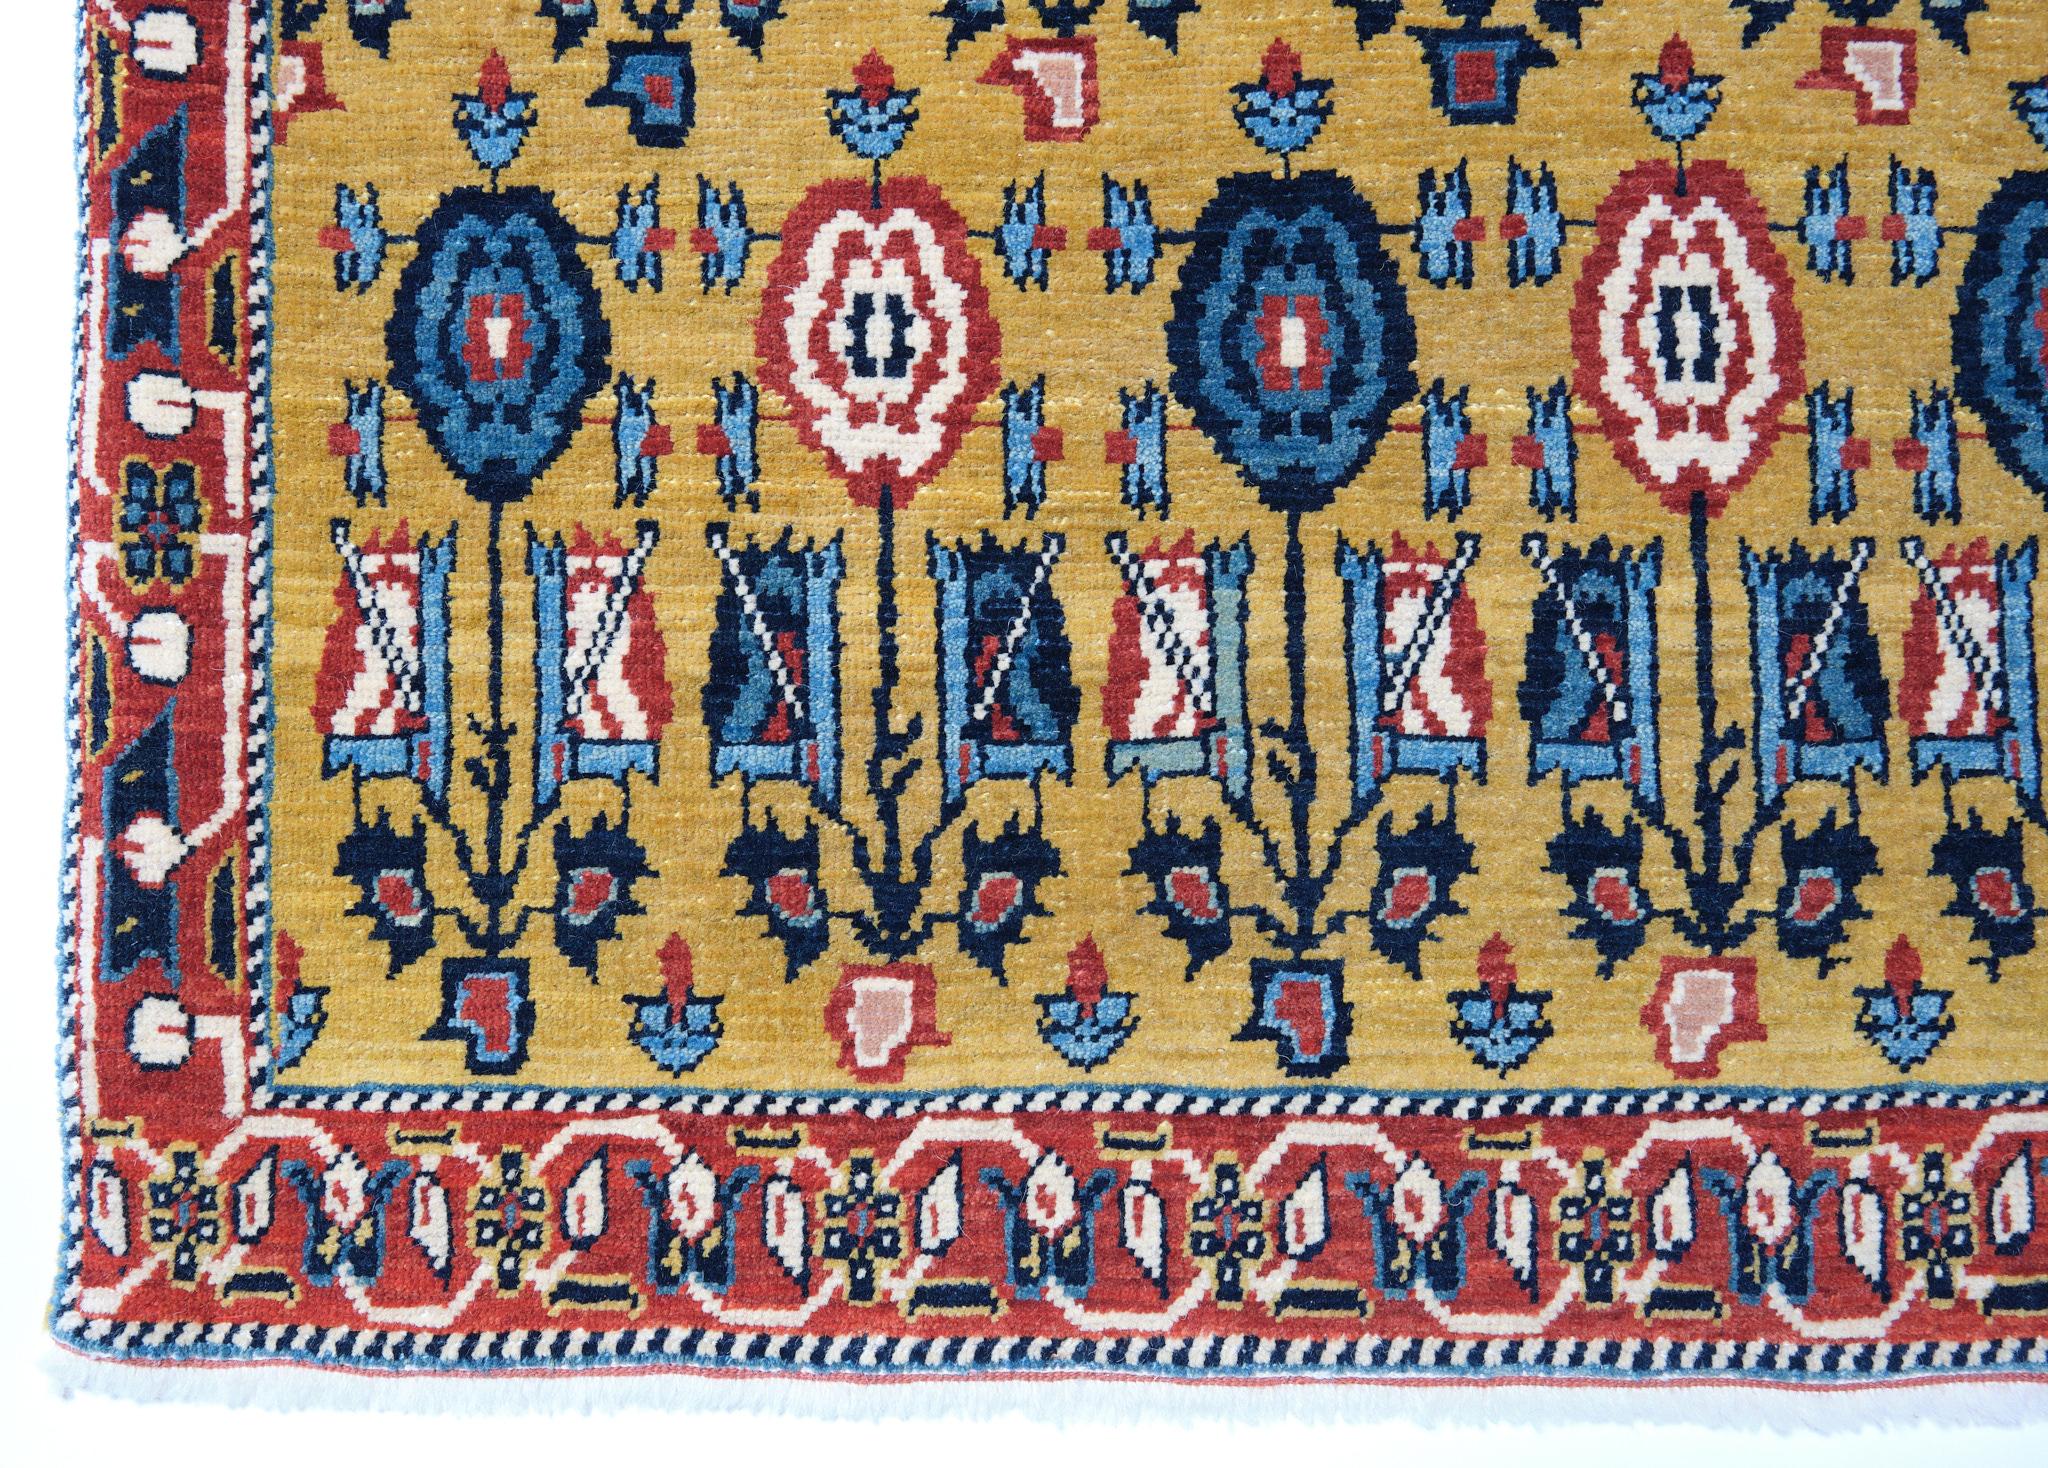 The source of the rug comes from the book Antique Rugs of Kurdistan A Historical Legacy of Woven Art, James D. Burns, 2002 nr.28. This was an exclusive example of offset rows of flowers designed 18th Century rug from Senna, Eastern Kurdistan area.